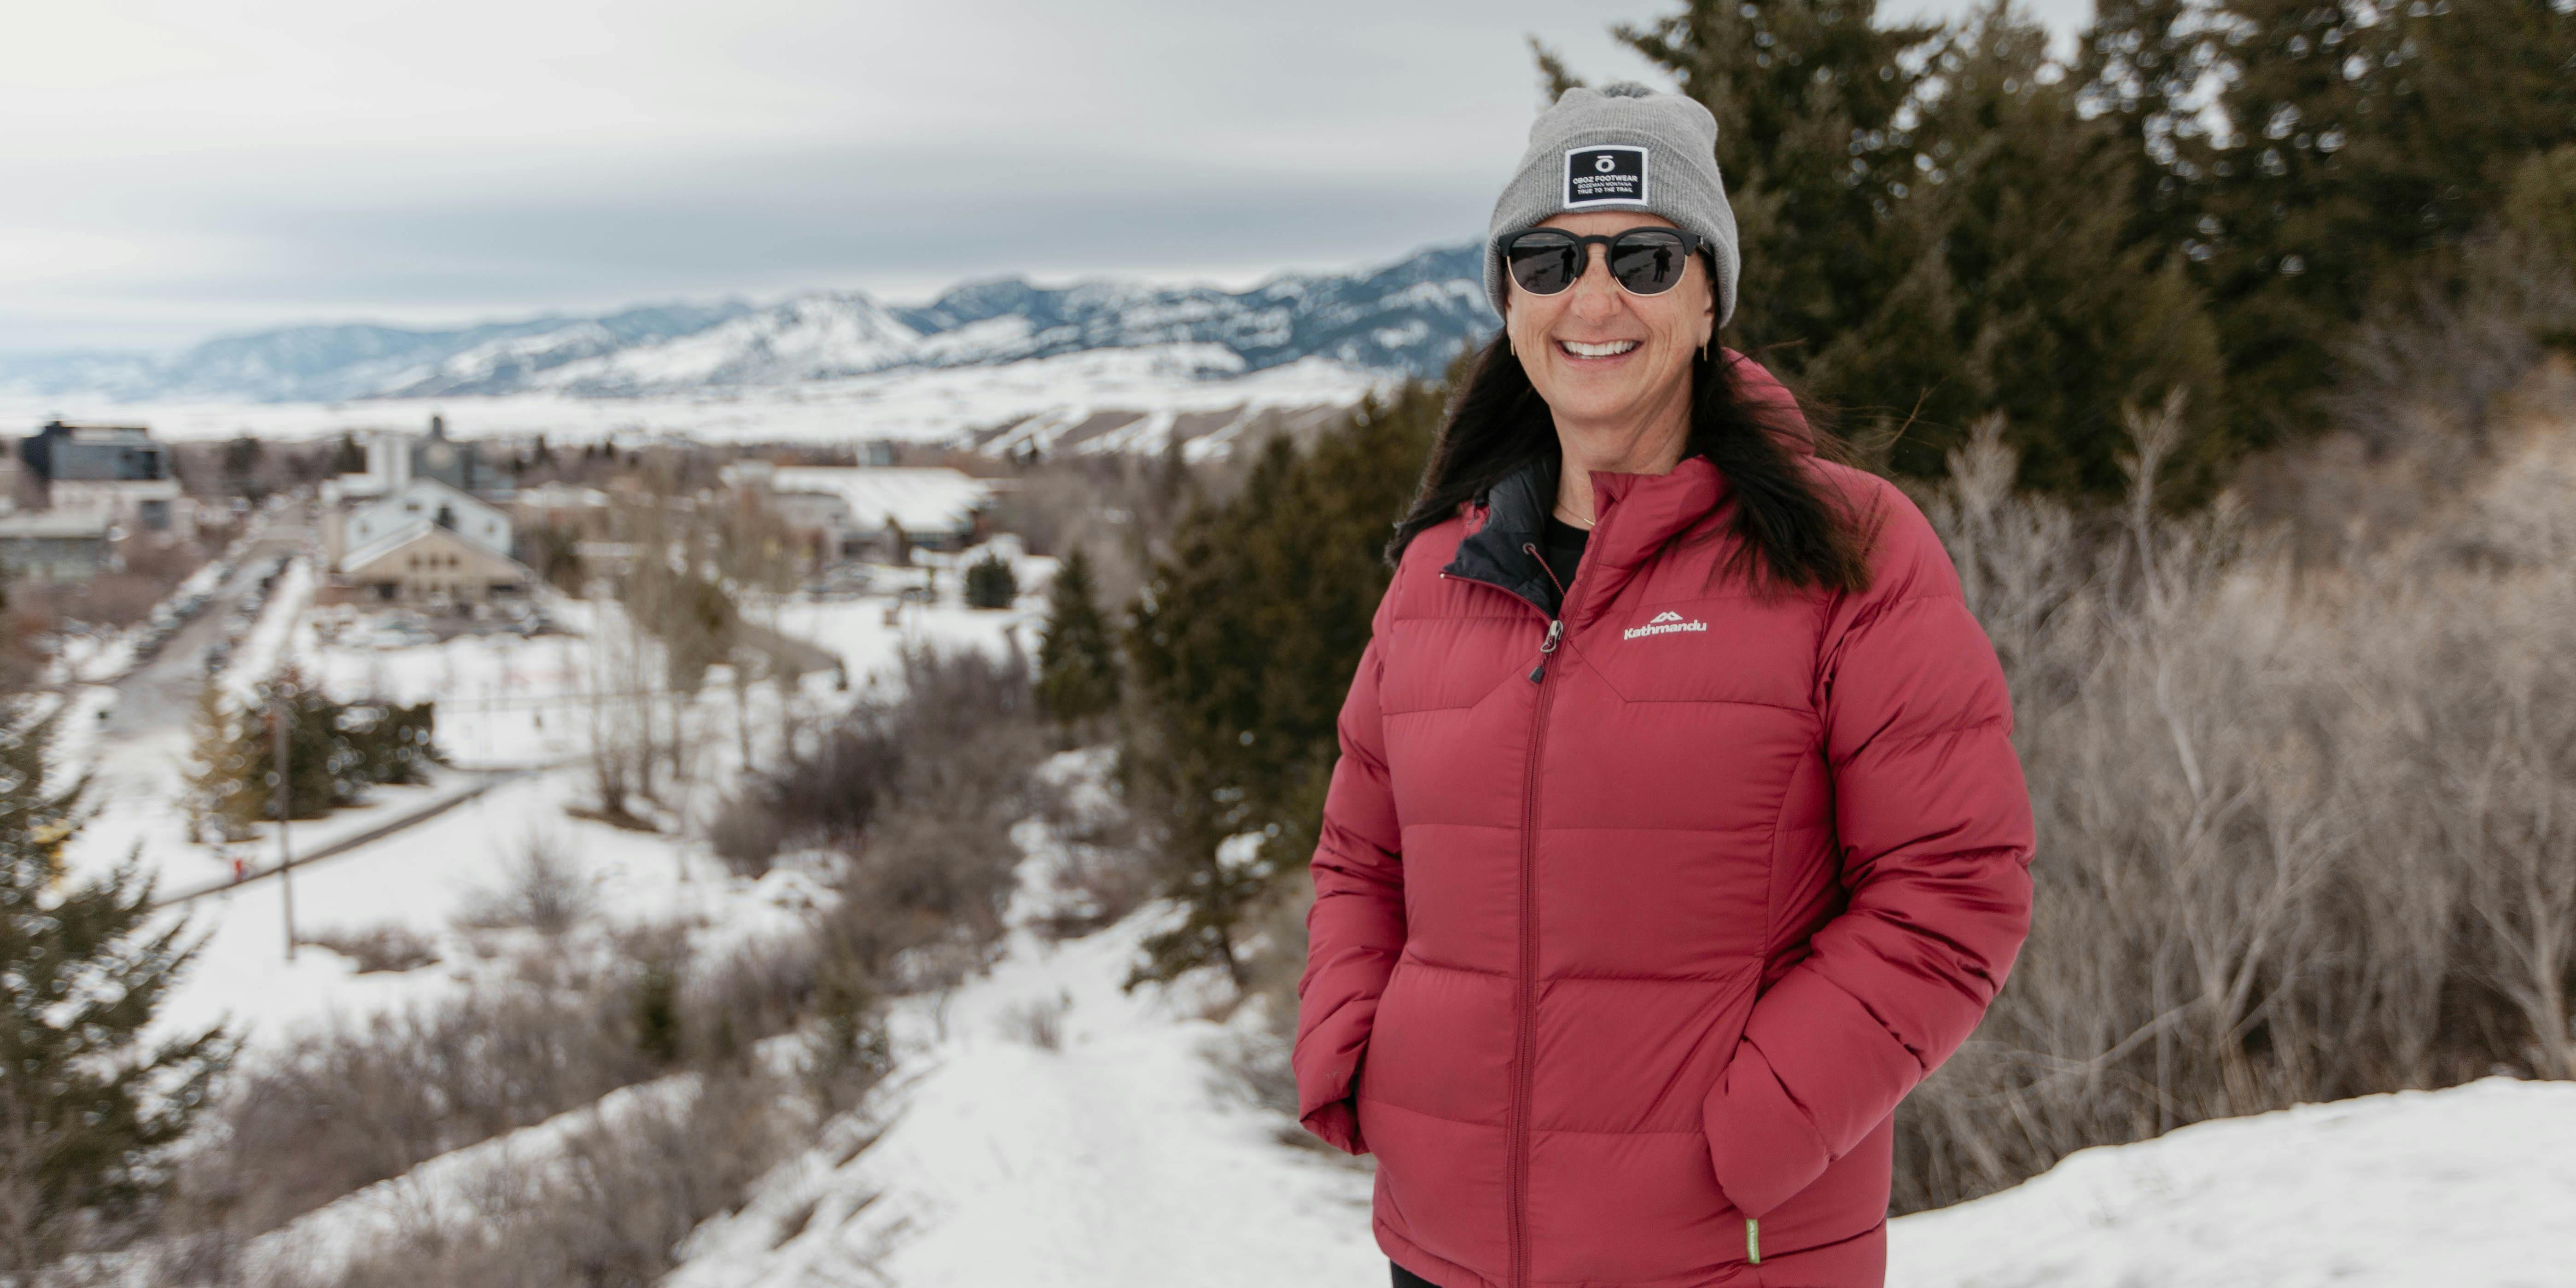 Amy stands on a wintry Bozeman trail in front of downtown and the Bridger Mountain Range.